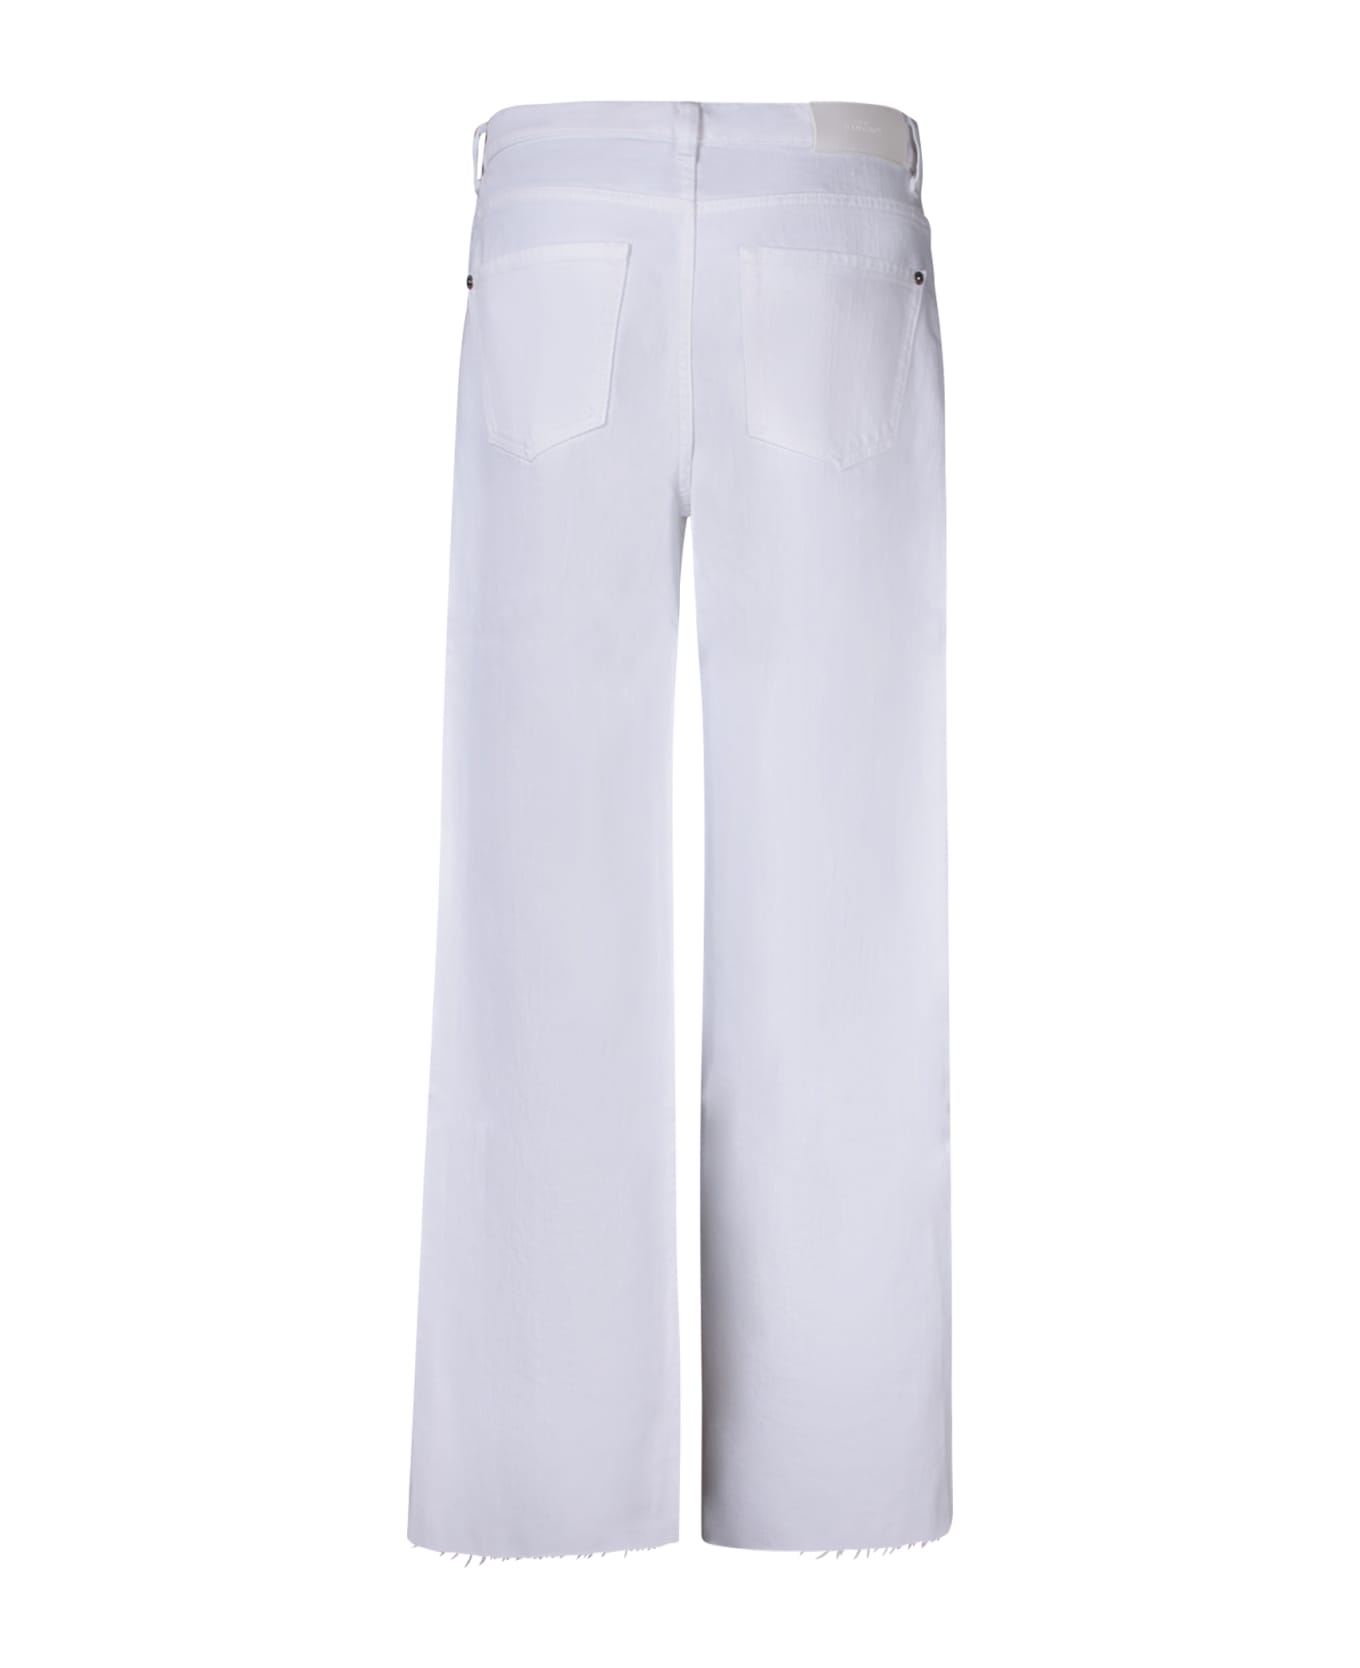 7 For All Mankind Scout White Jeans - White